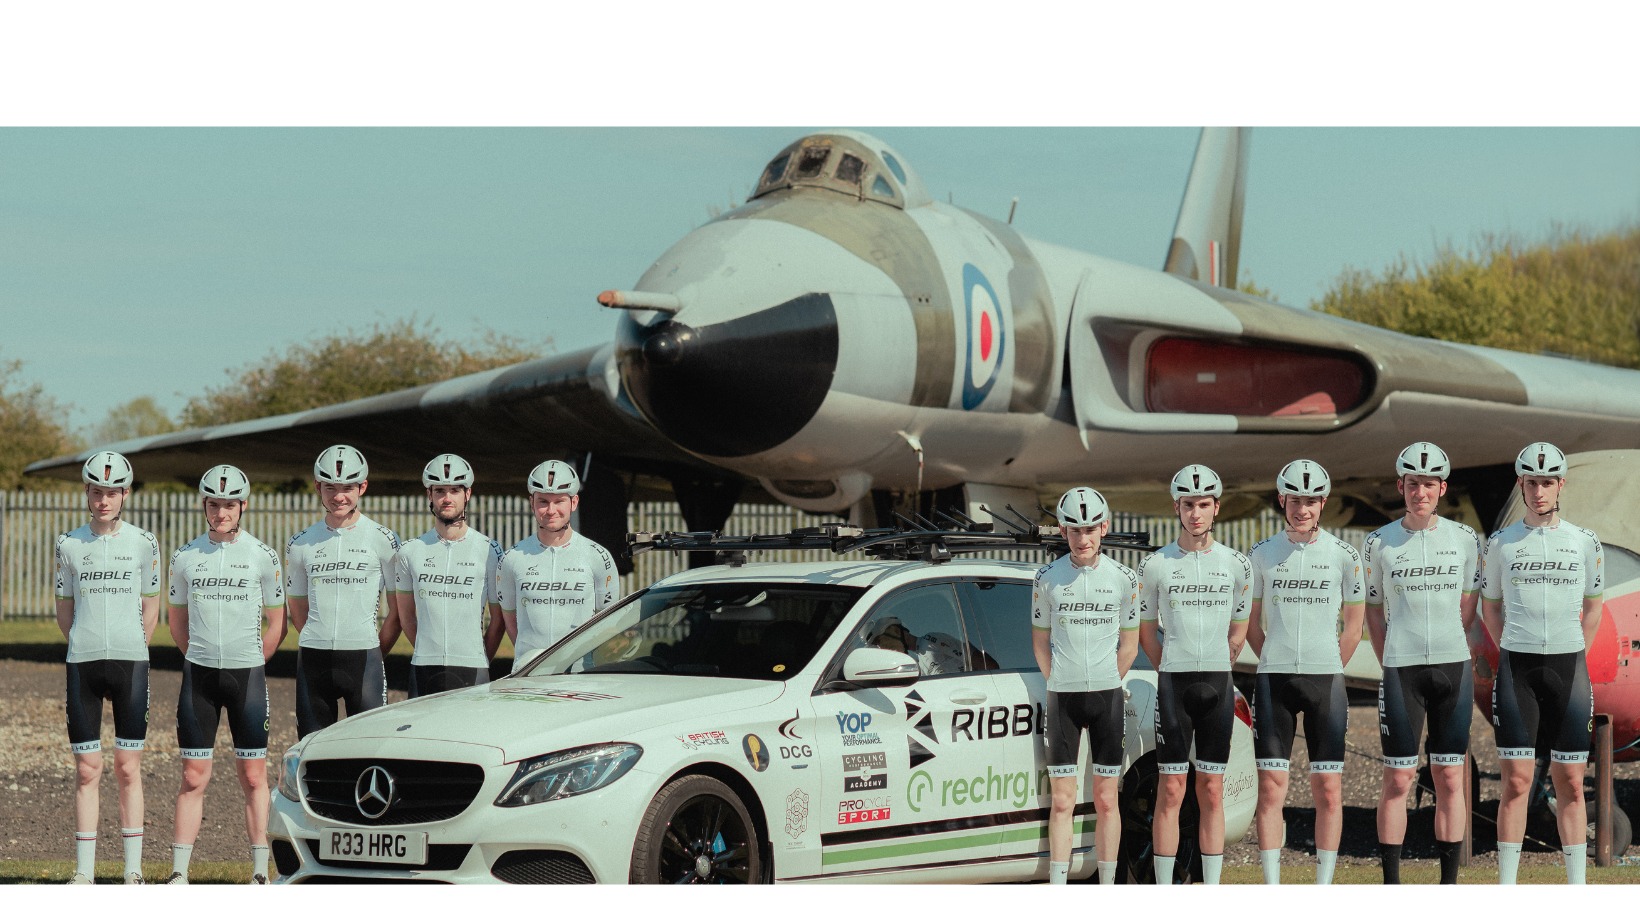 Members of the RIBBL Rechrg team stood by a car and in front of a jet.